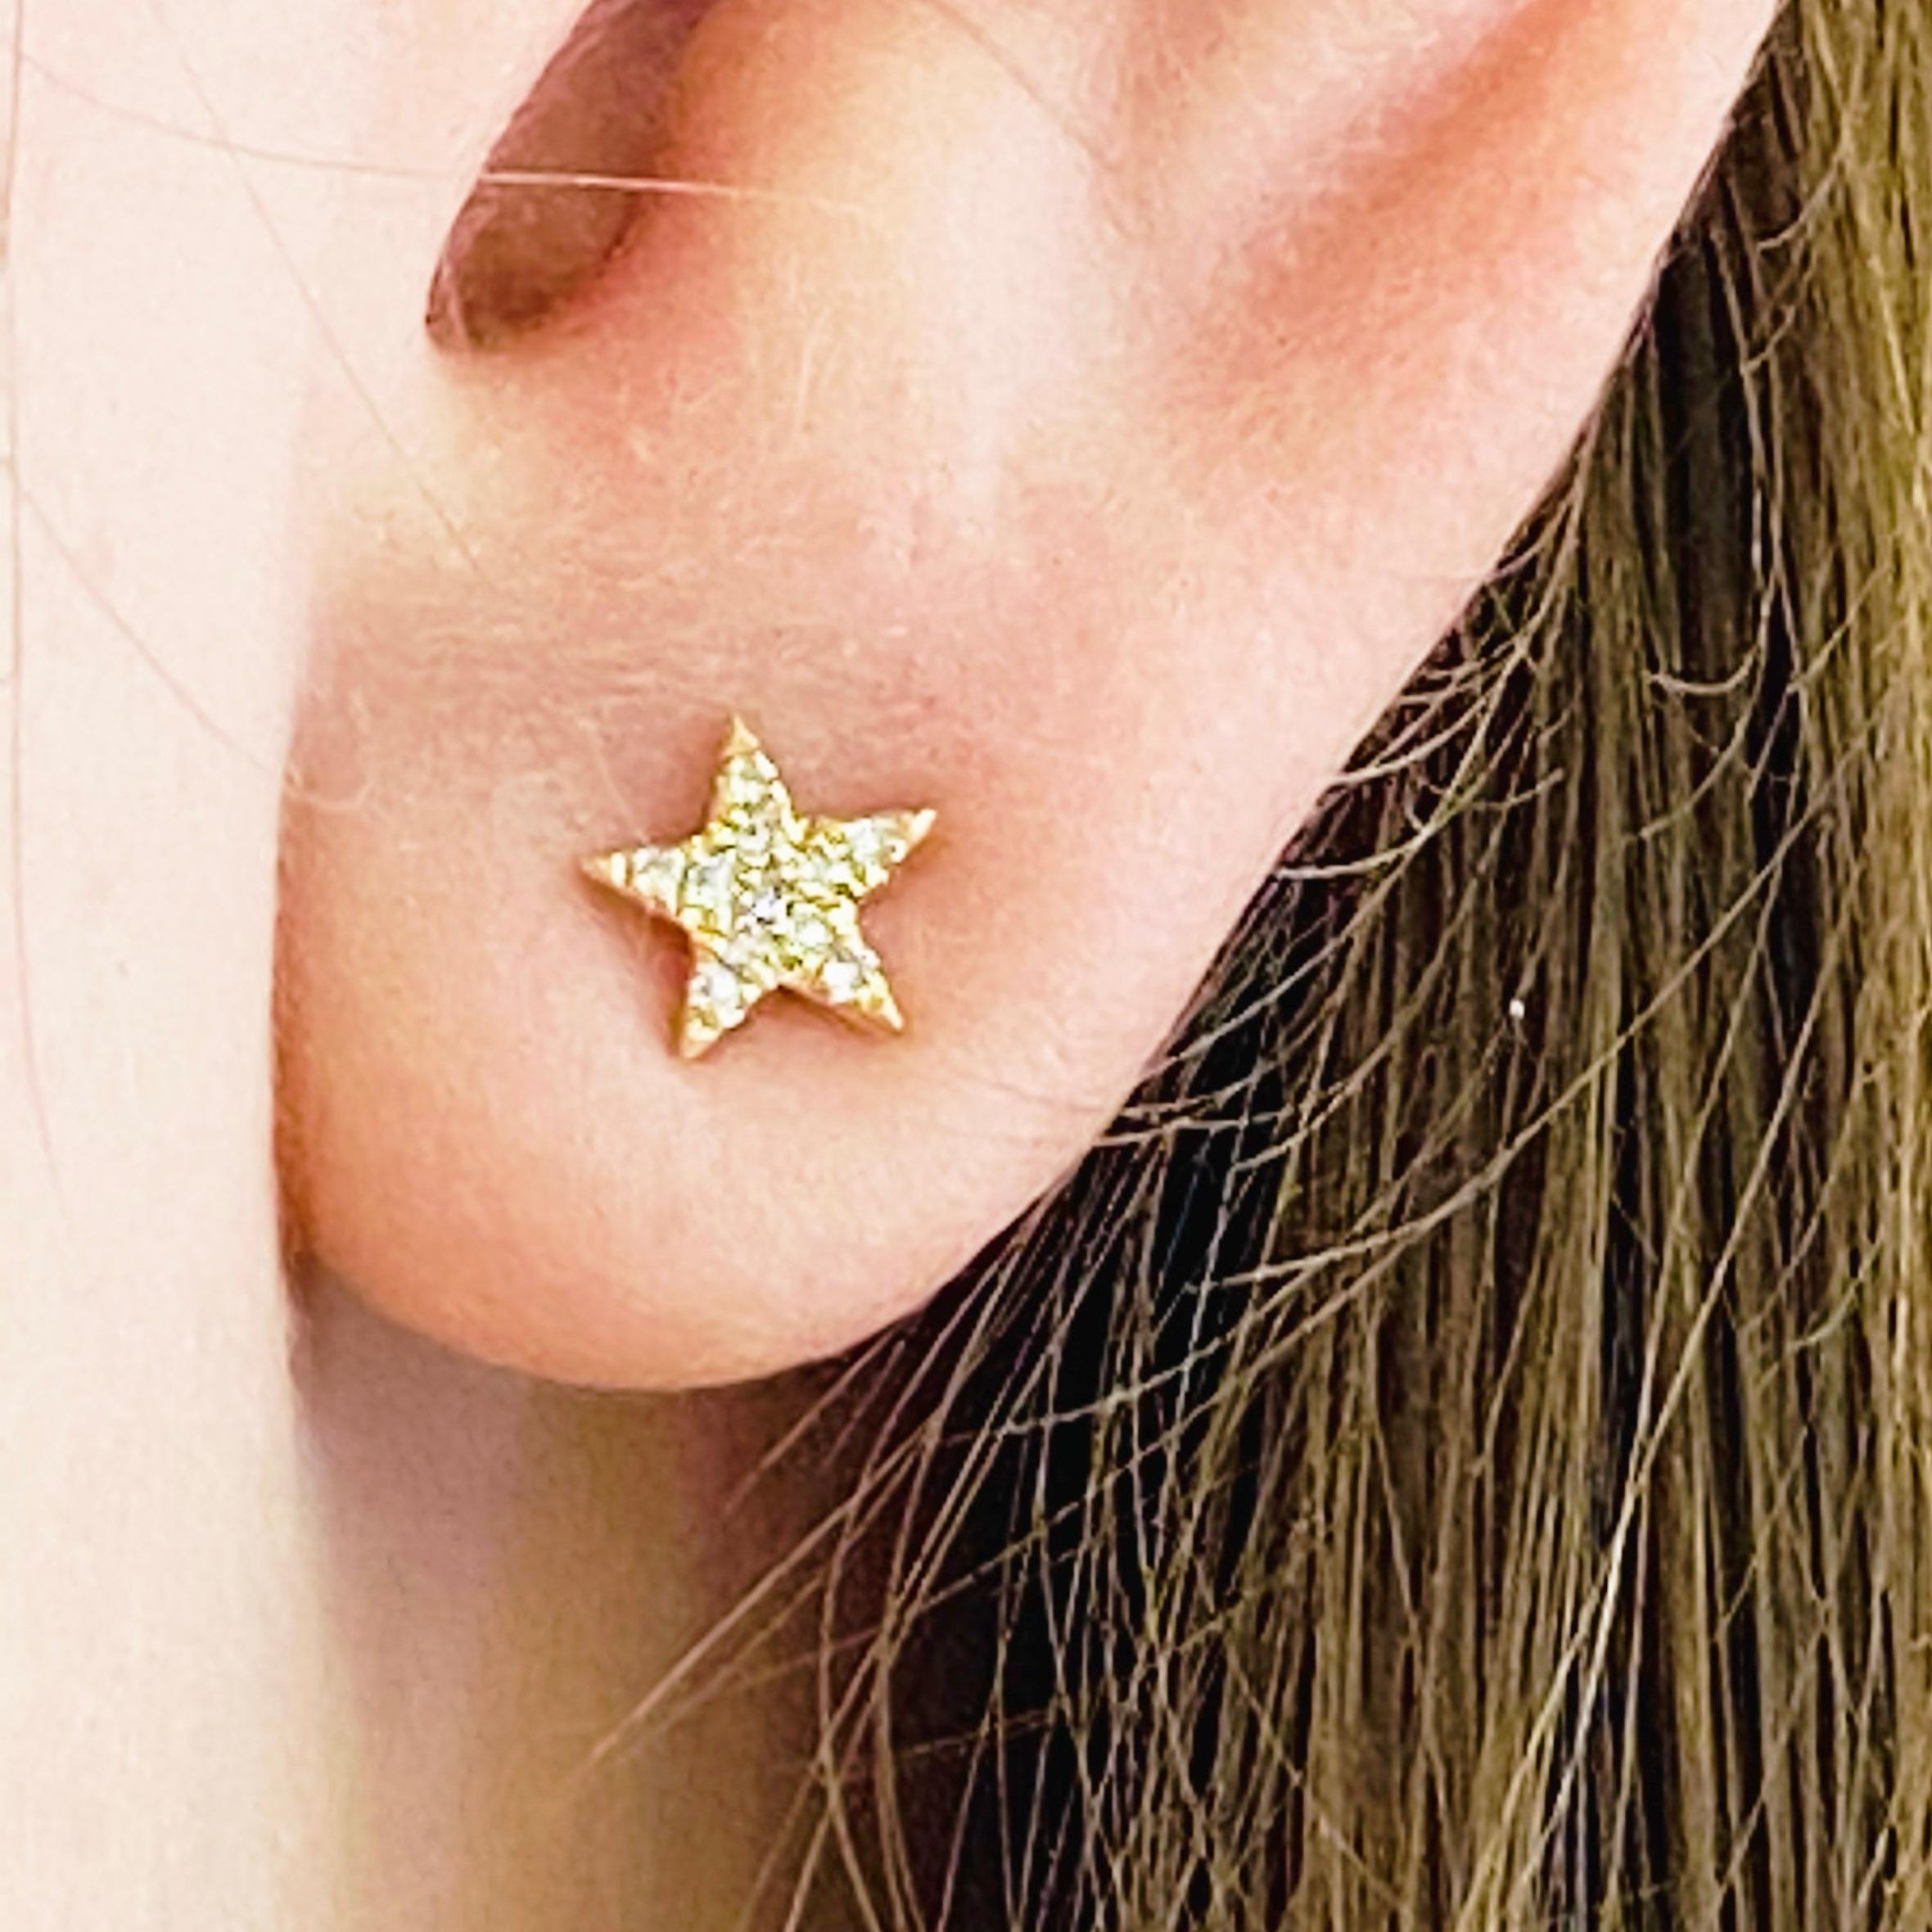 These stunning 14k yellow gold star stud earrings dripping with diamonds provide a look that is both trendy and classic. These pave diamond earrings are a great staple to add to your collection, and can be worn with both casual and formal wear. 